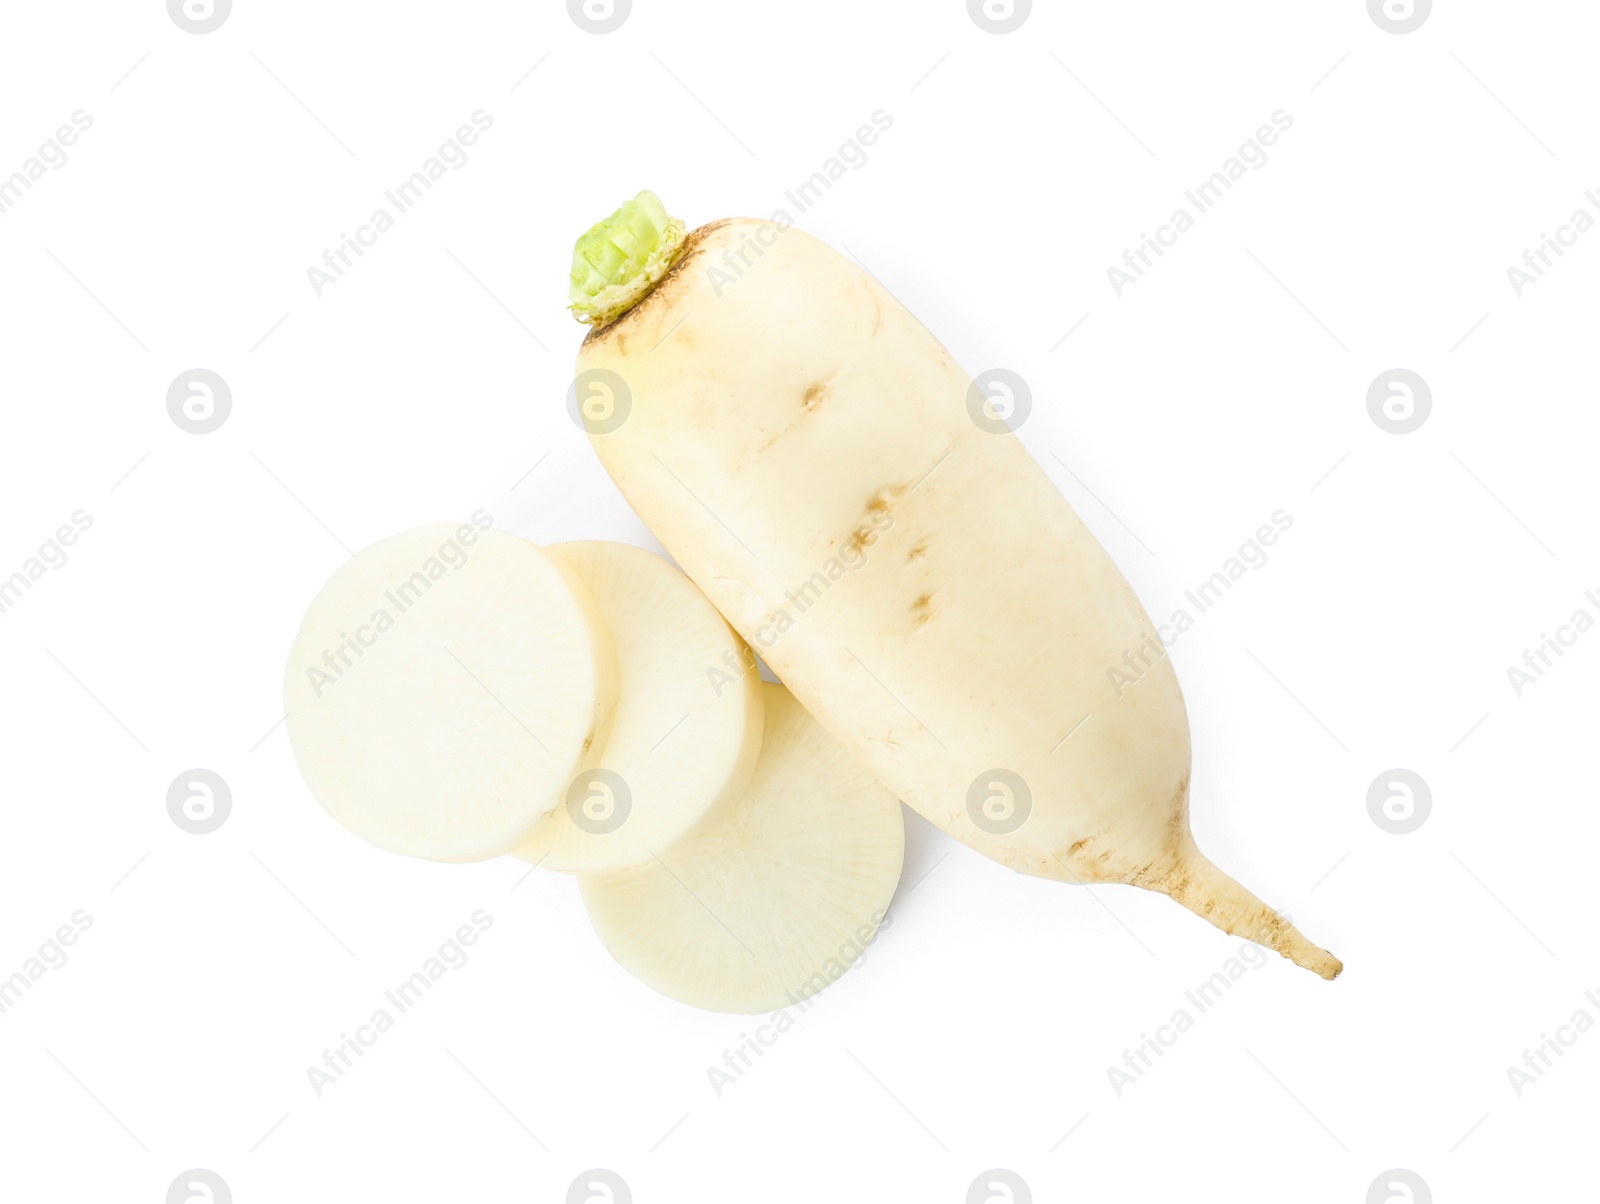 Photo of Sliced and whole fresh ripe turnips on white background, top view